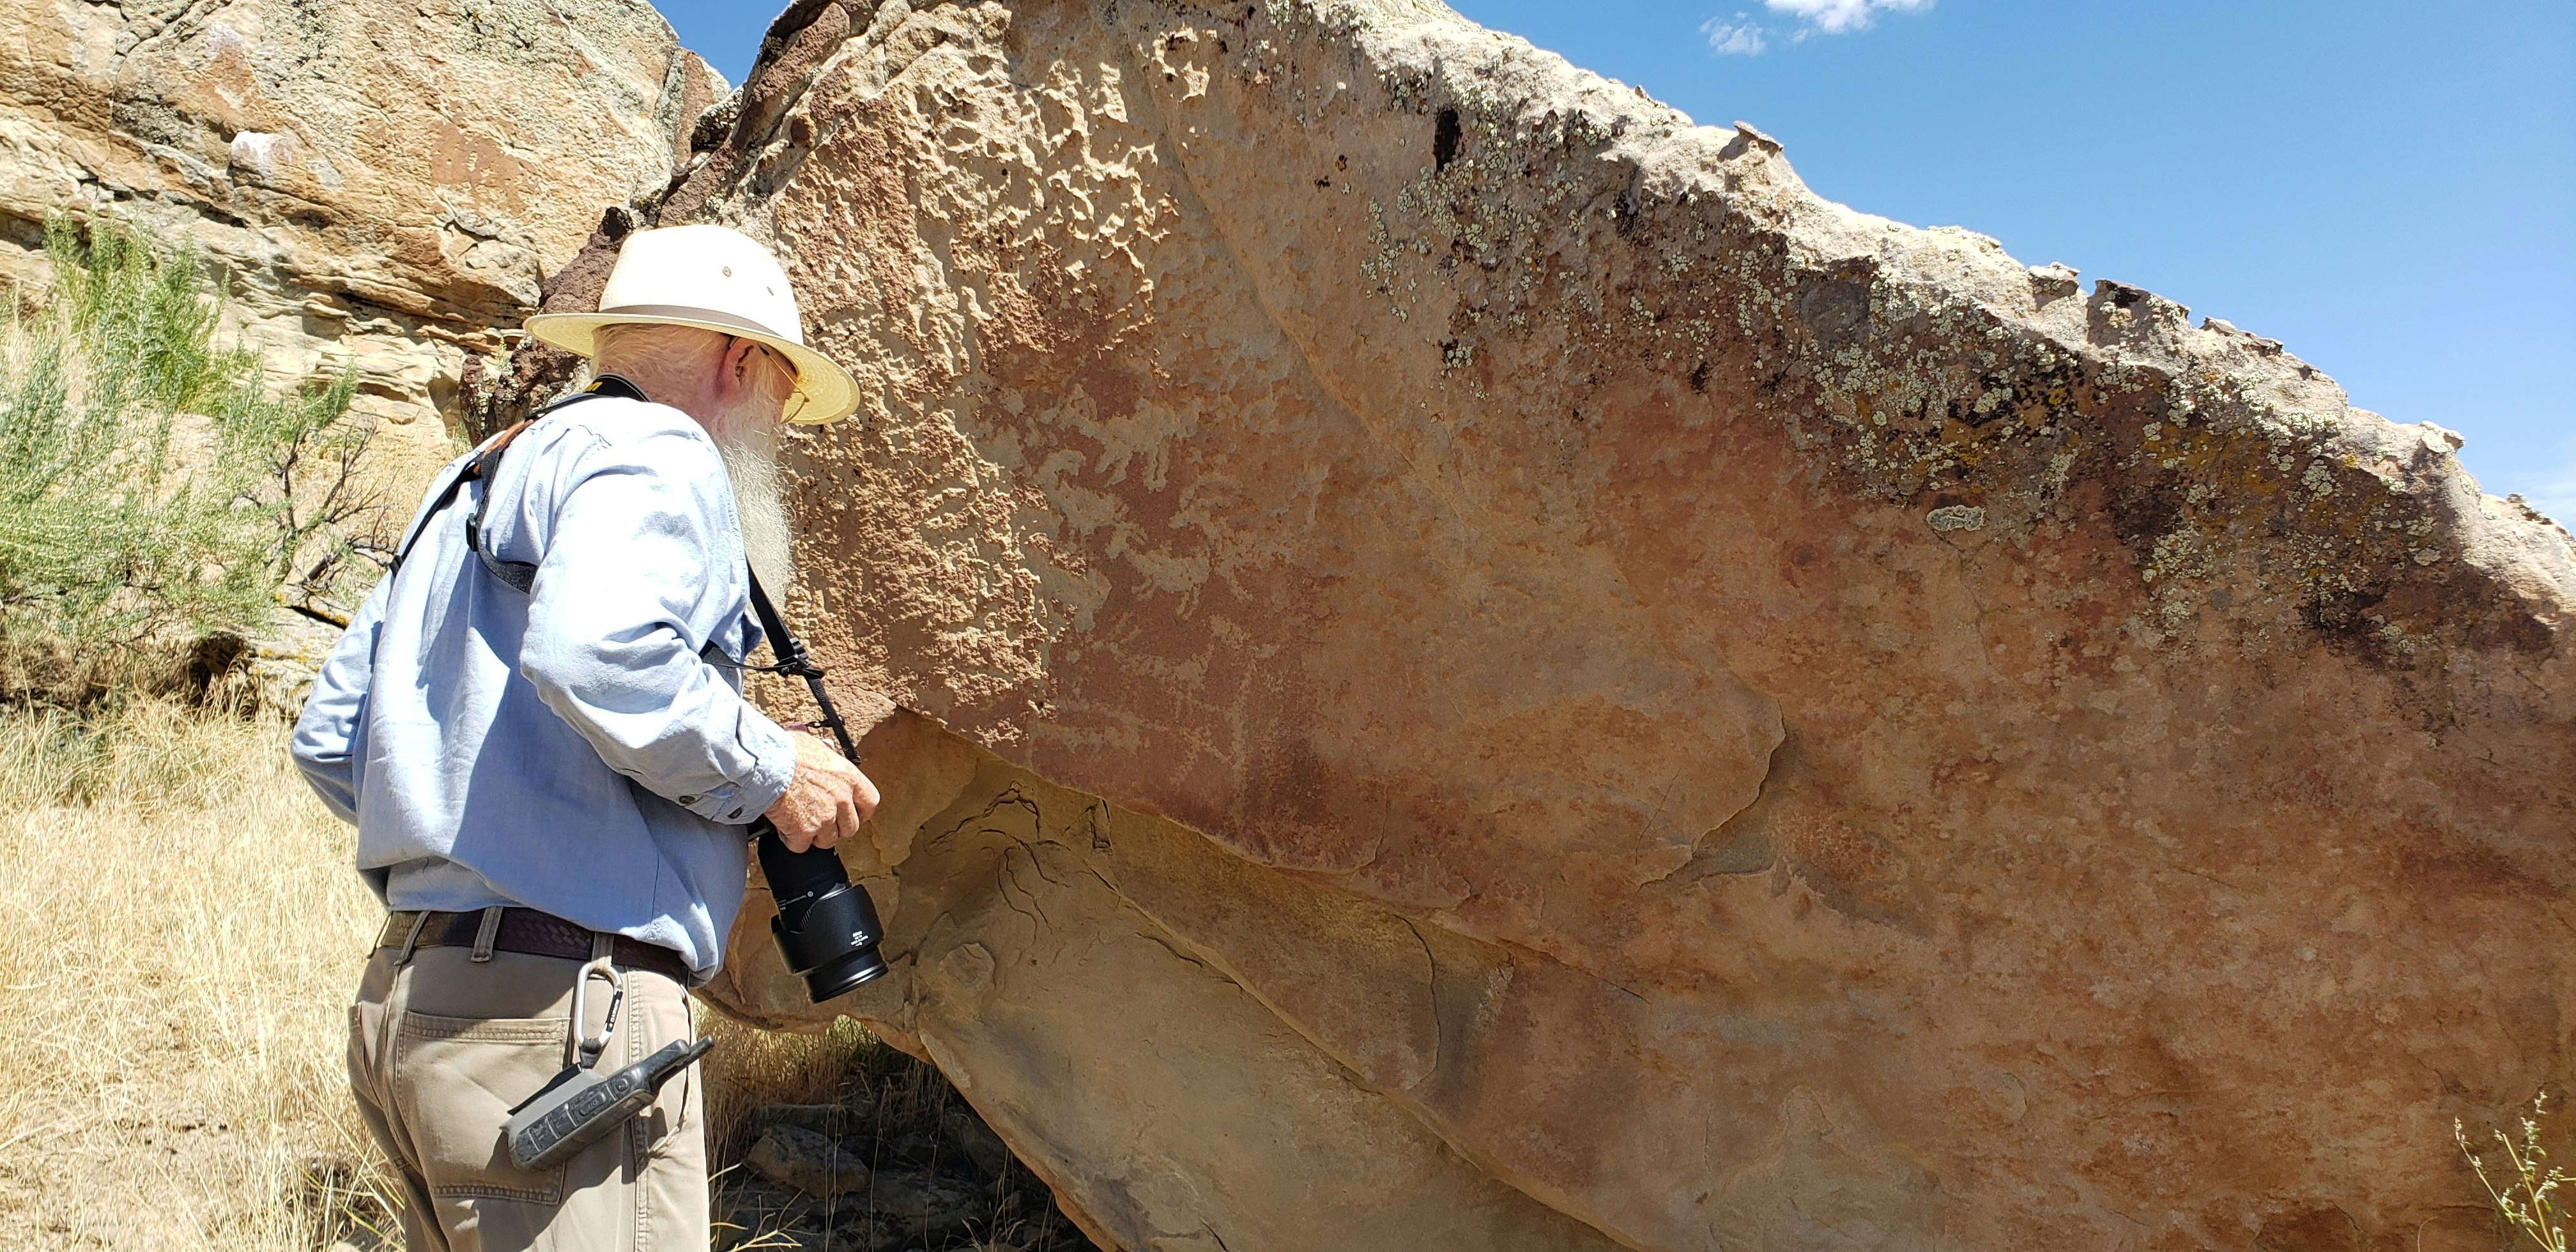 Mike Bies talks about a petroglyph that likely shows a narrative involving sheep on the Wind River Indian Reservation.